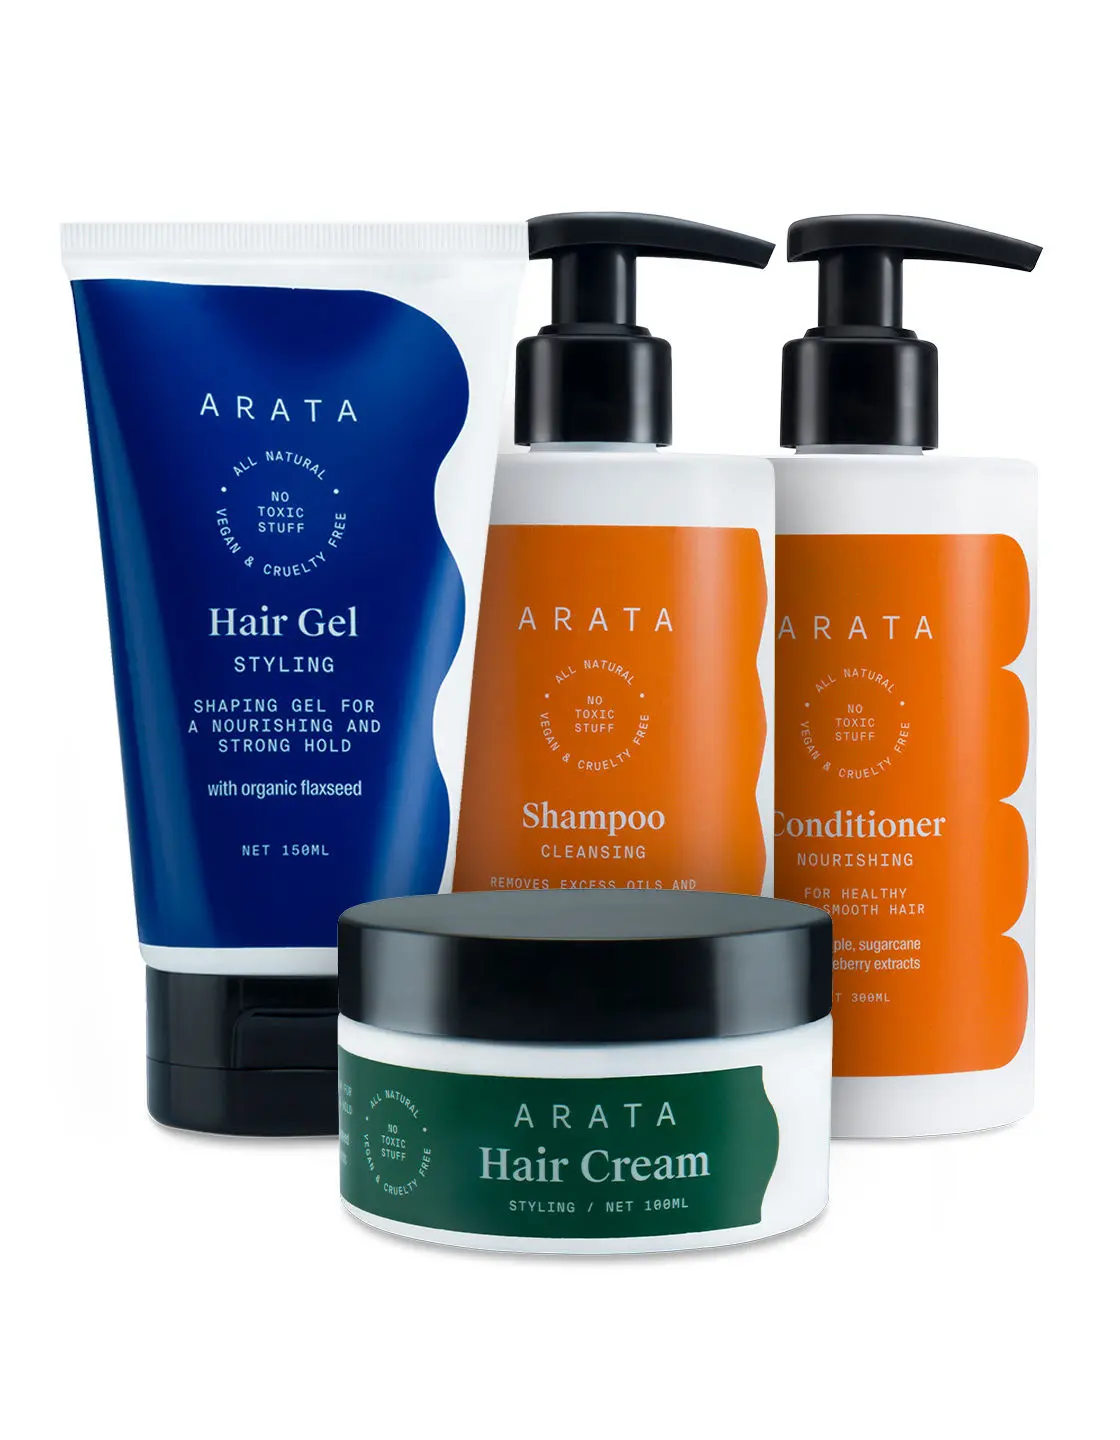 Arata Natural Hair Care Essentials for Men & Women with Cleansing Shampoo,Conditioner, Hair Gel & Hair Cream|| All Natural,Vegan & Cruelty Free || Plant Based,Non-Toxic Hair Cleansing & Styling